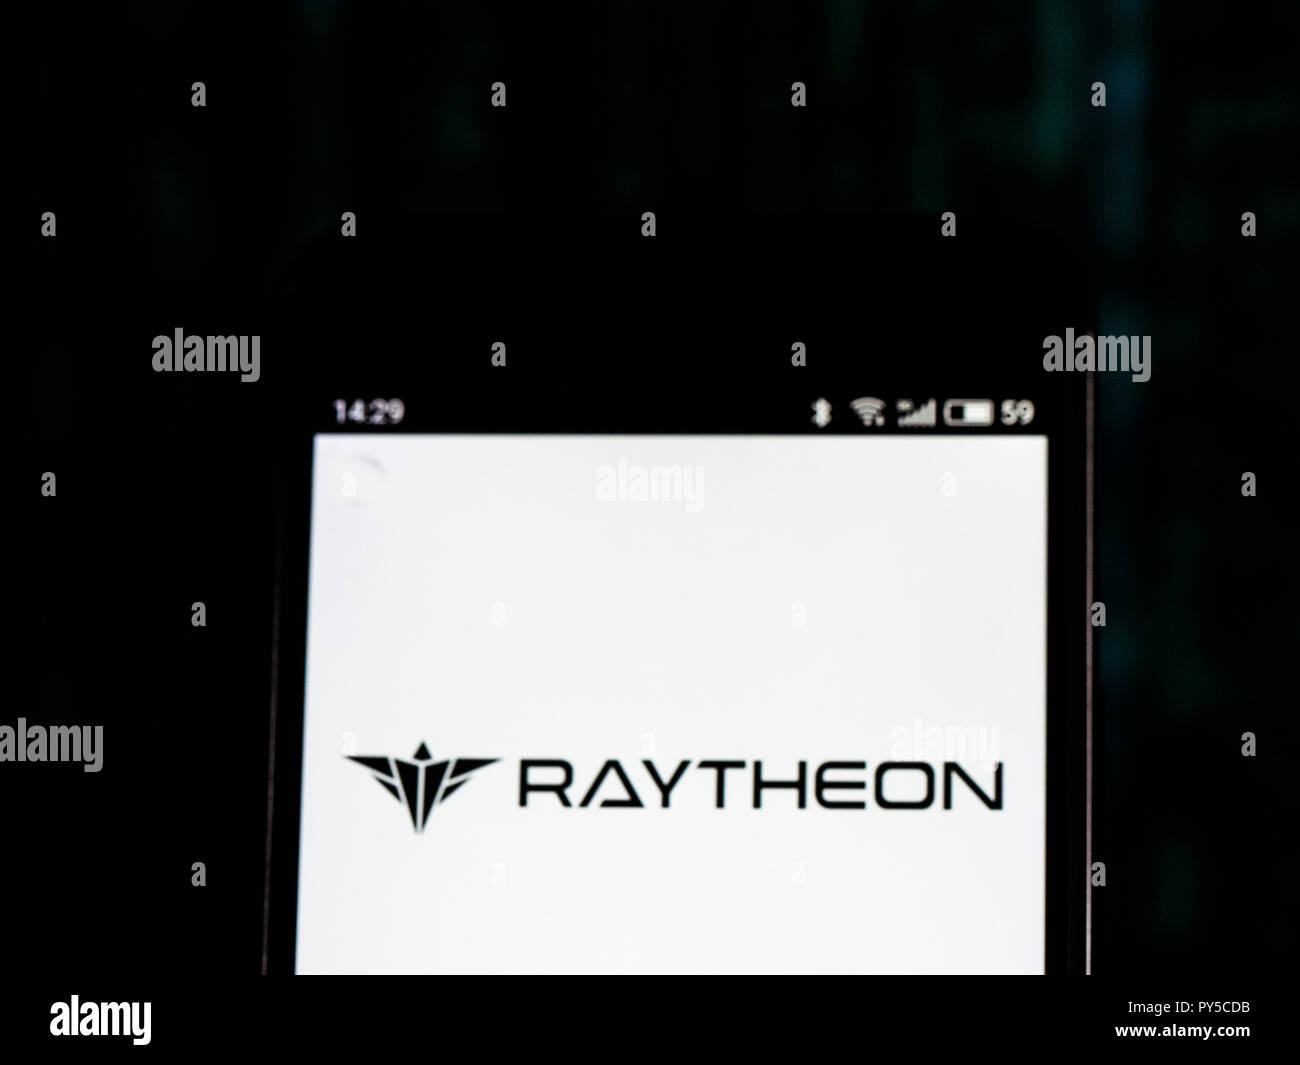 Raytheon Defense contractor company logo seen displayed on smart phone.The Raytheon Company is a major U.S. defense contractor and industrial corporation with core manufacturing concentrations in weapons and military and commercial electronics. Stock Photo